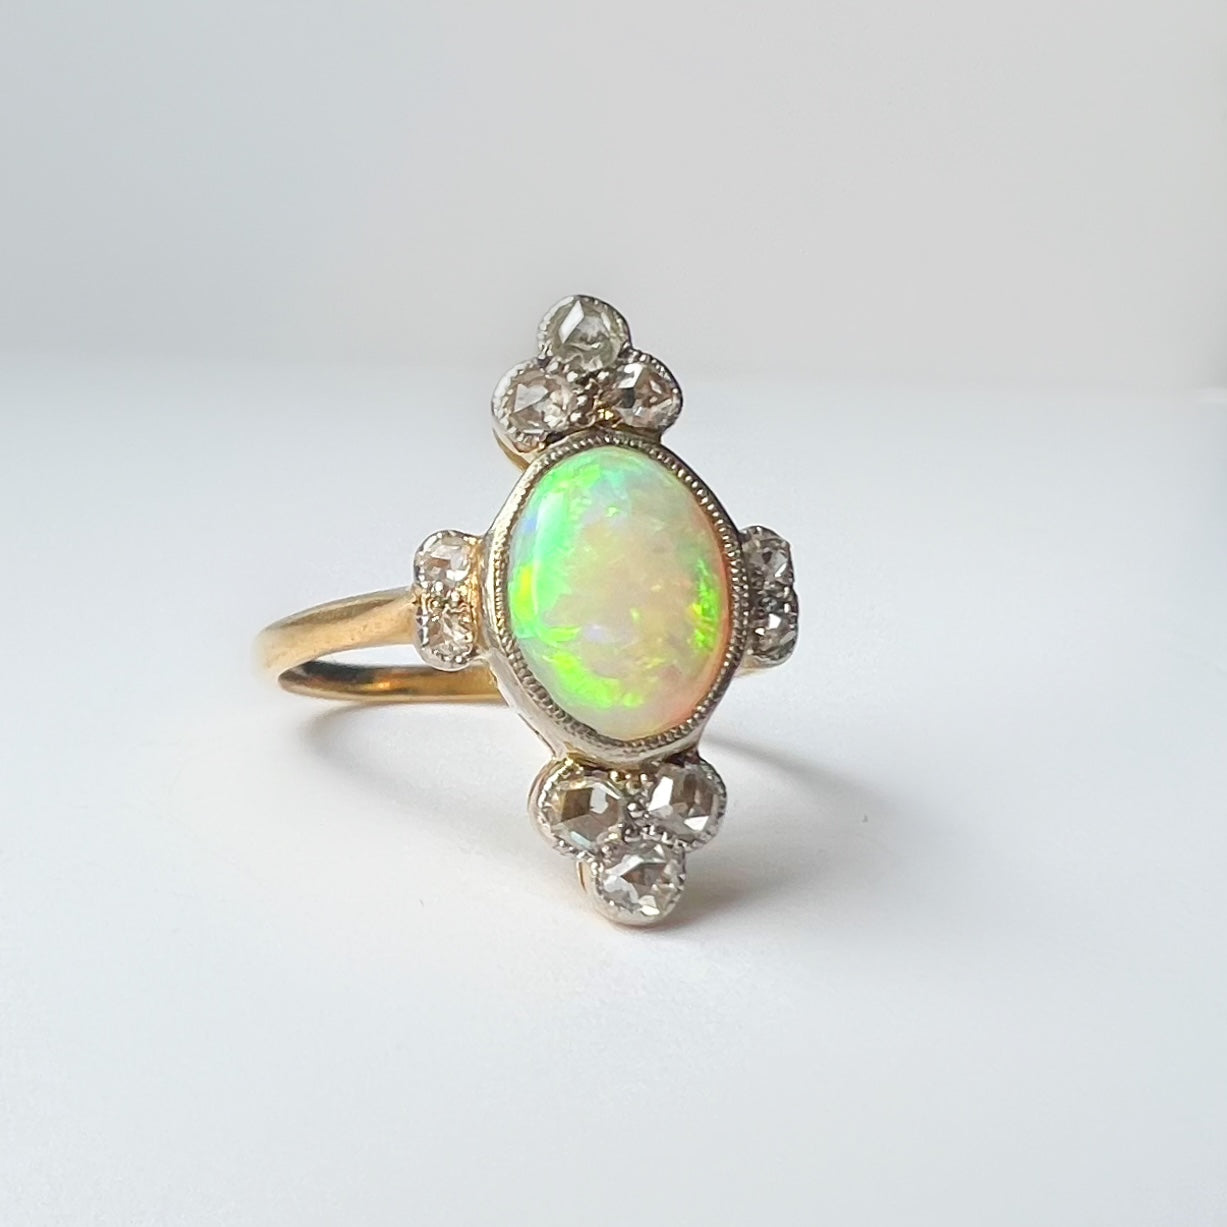 Ornate Antique Opal and Diamond Ring